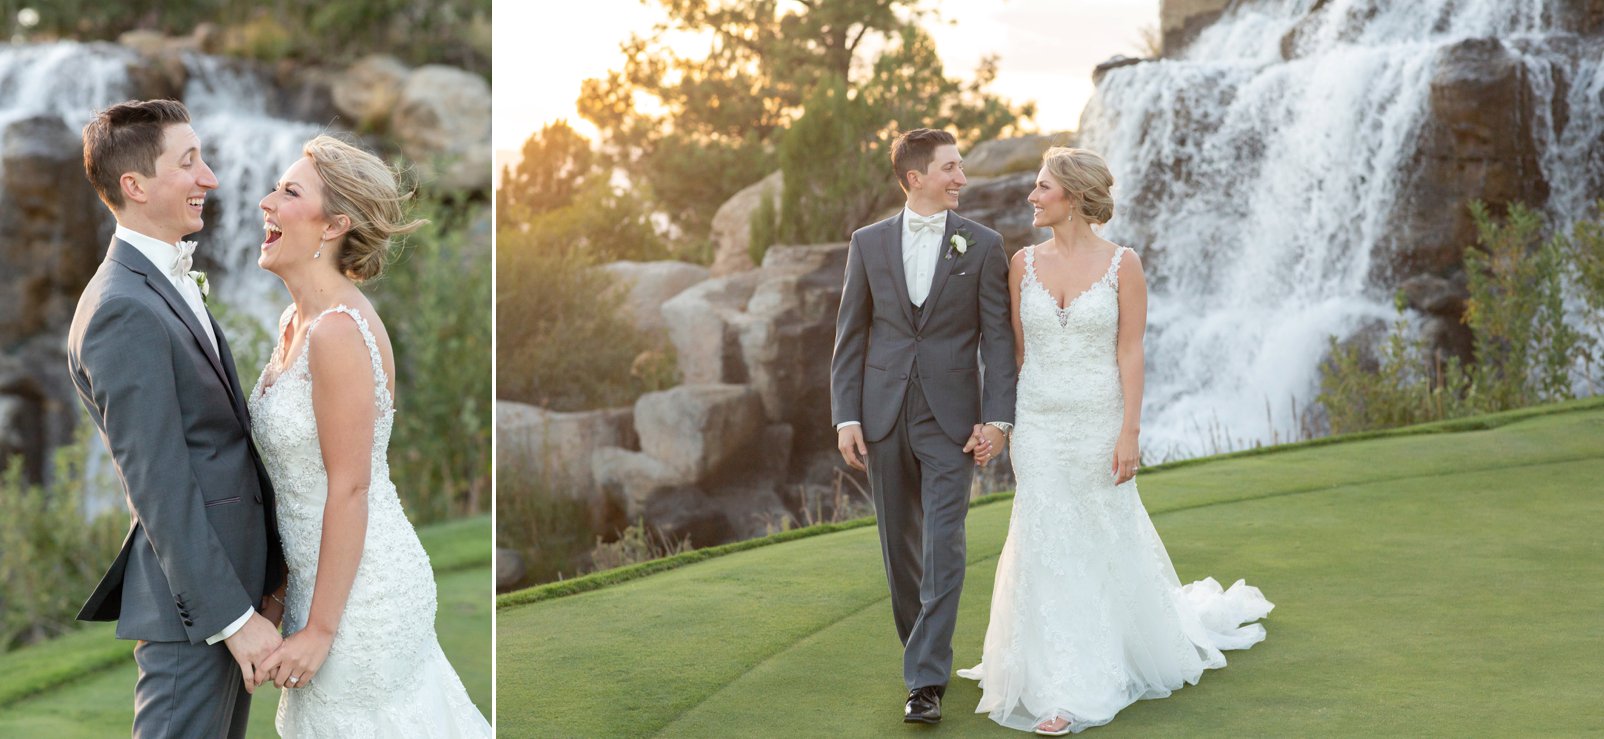 bride and groom by waterfall at sanctuary golf course wedding